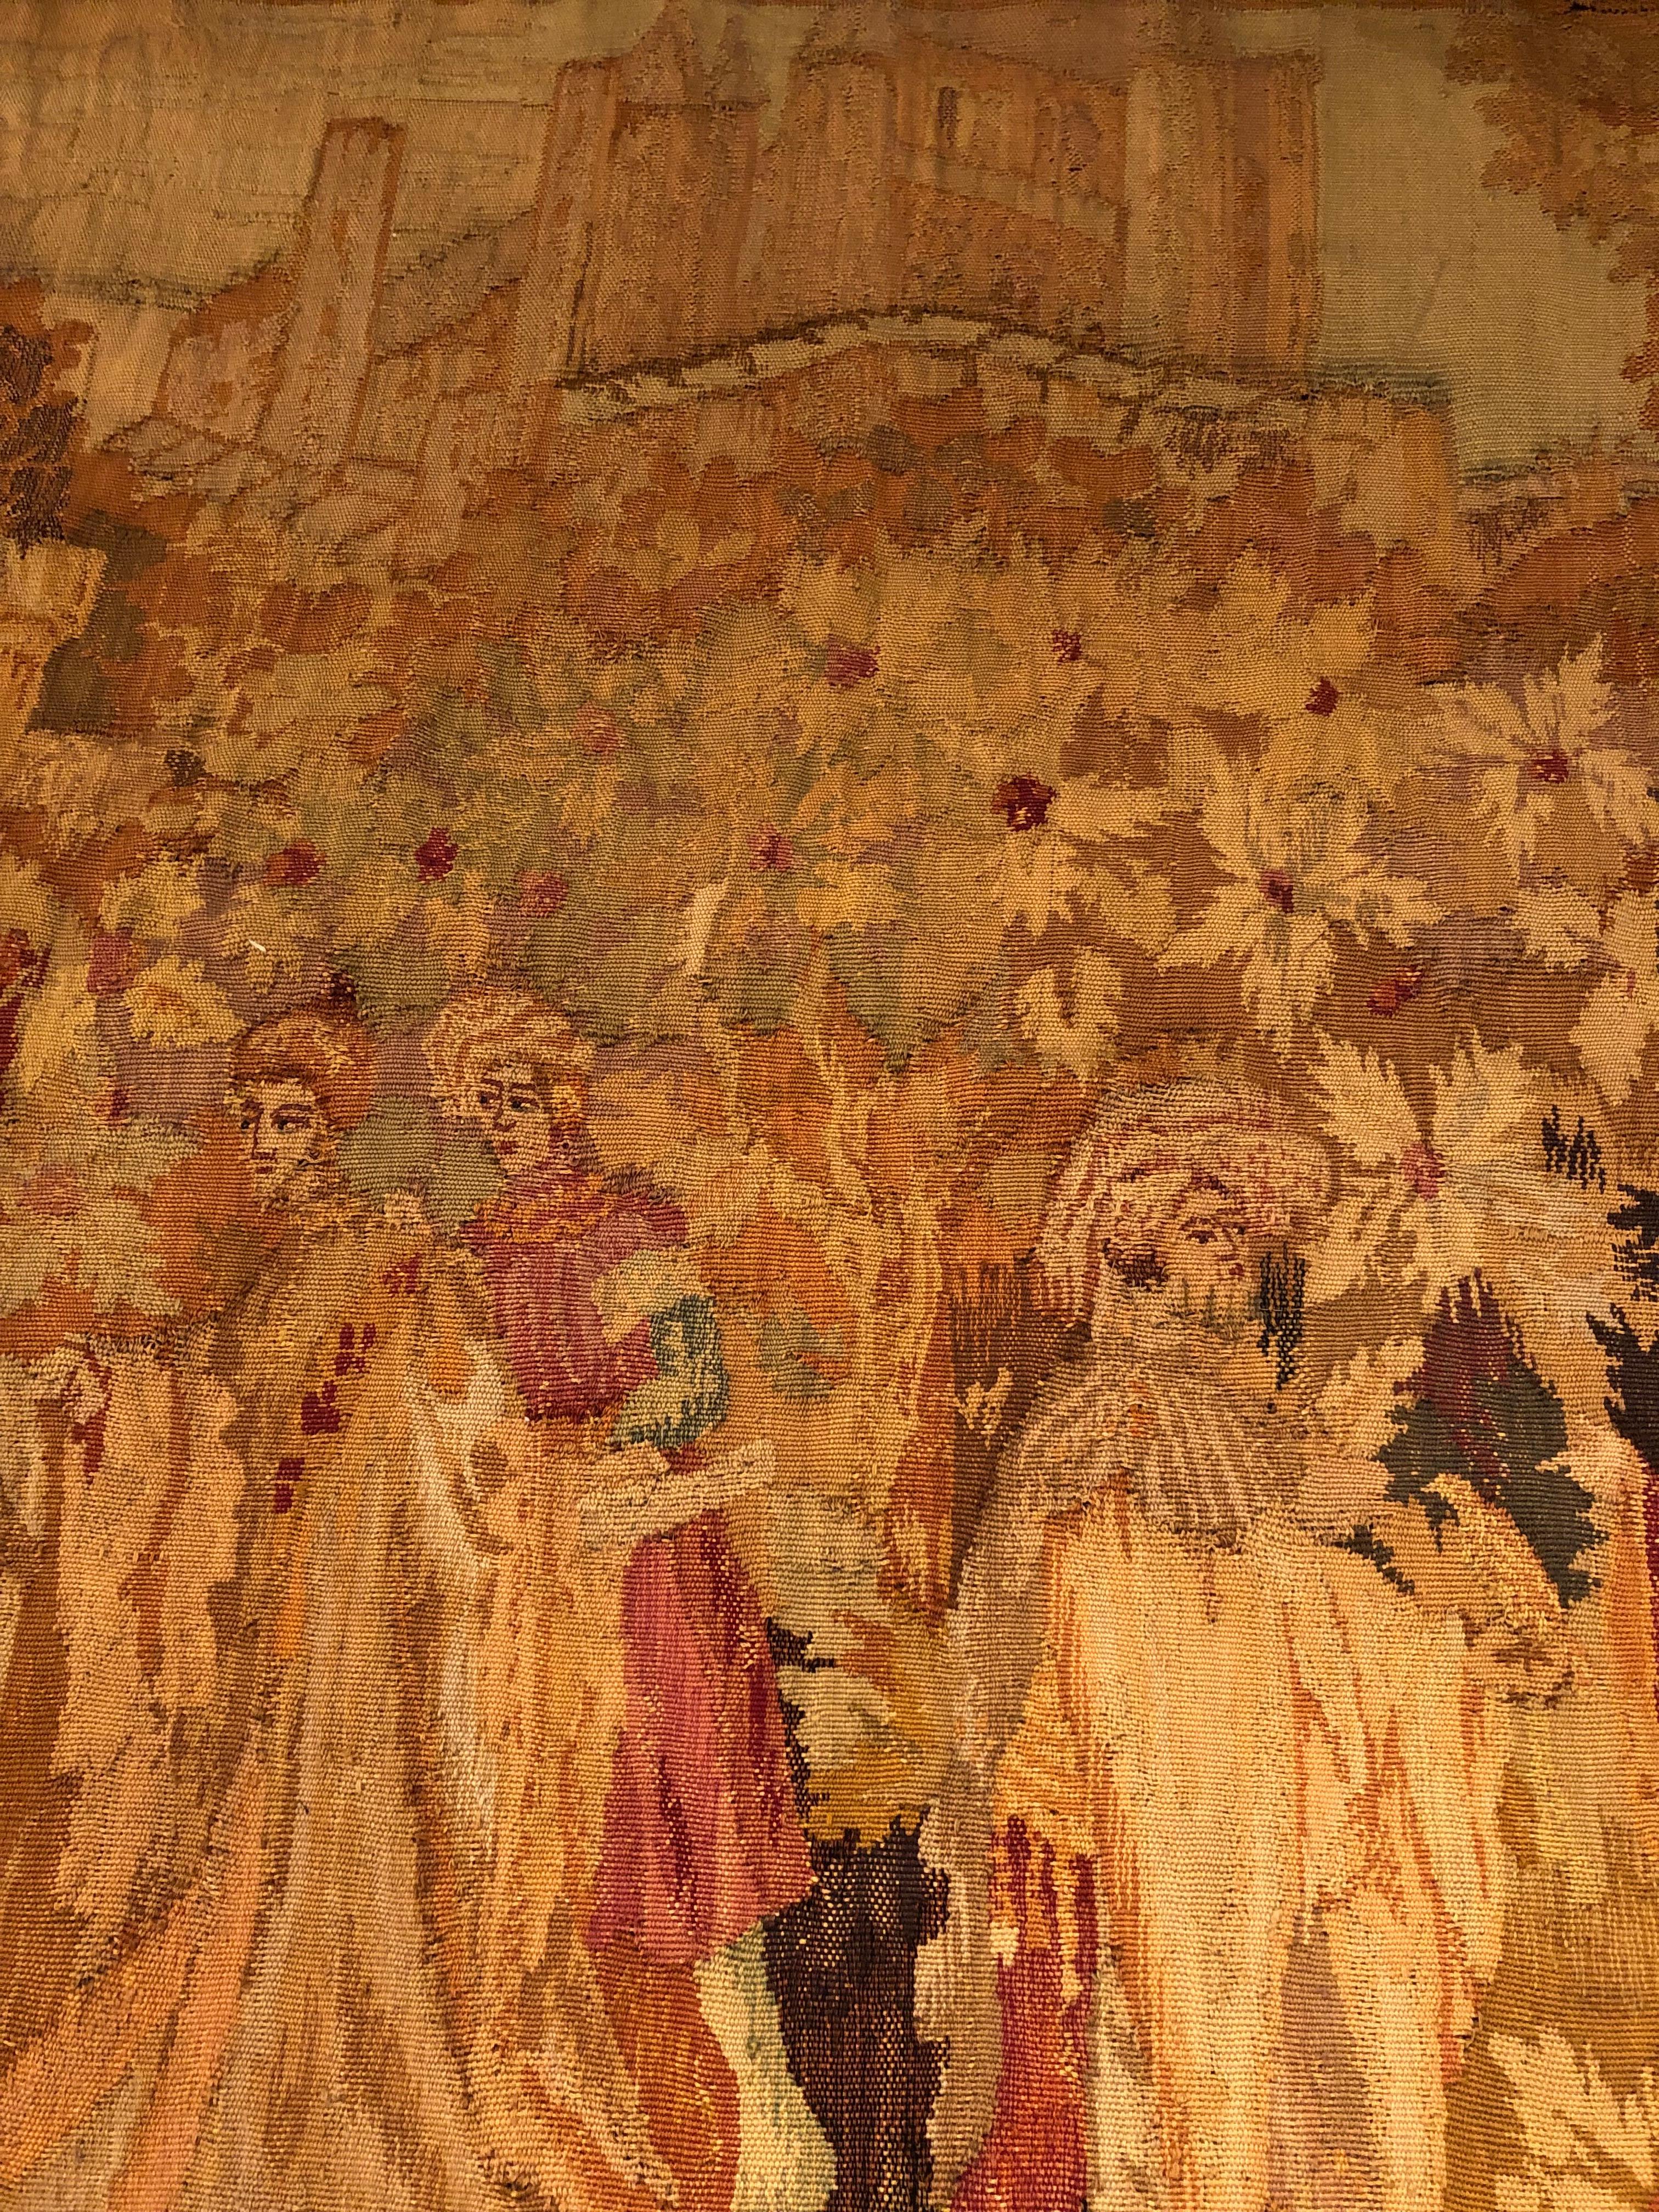 Gorgeous Intricately Detailed 19th Century Tapestry in Warm Autumn Tones For Sale 1